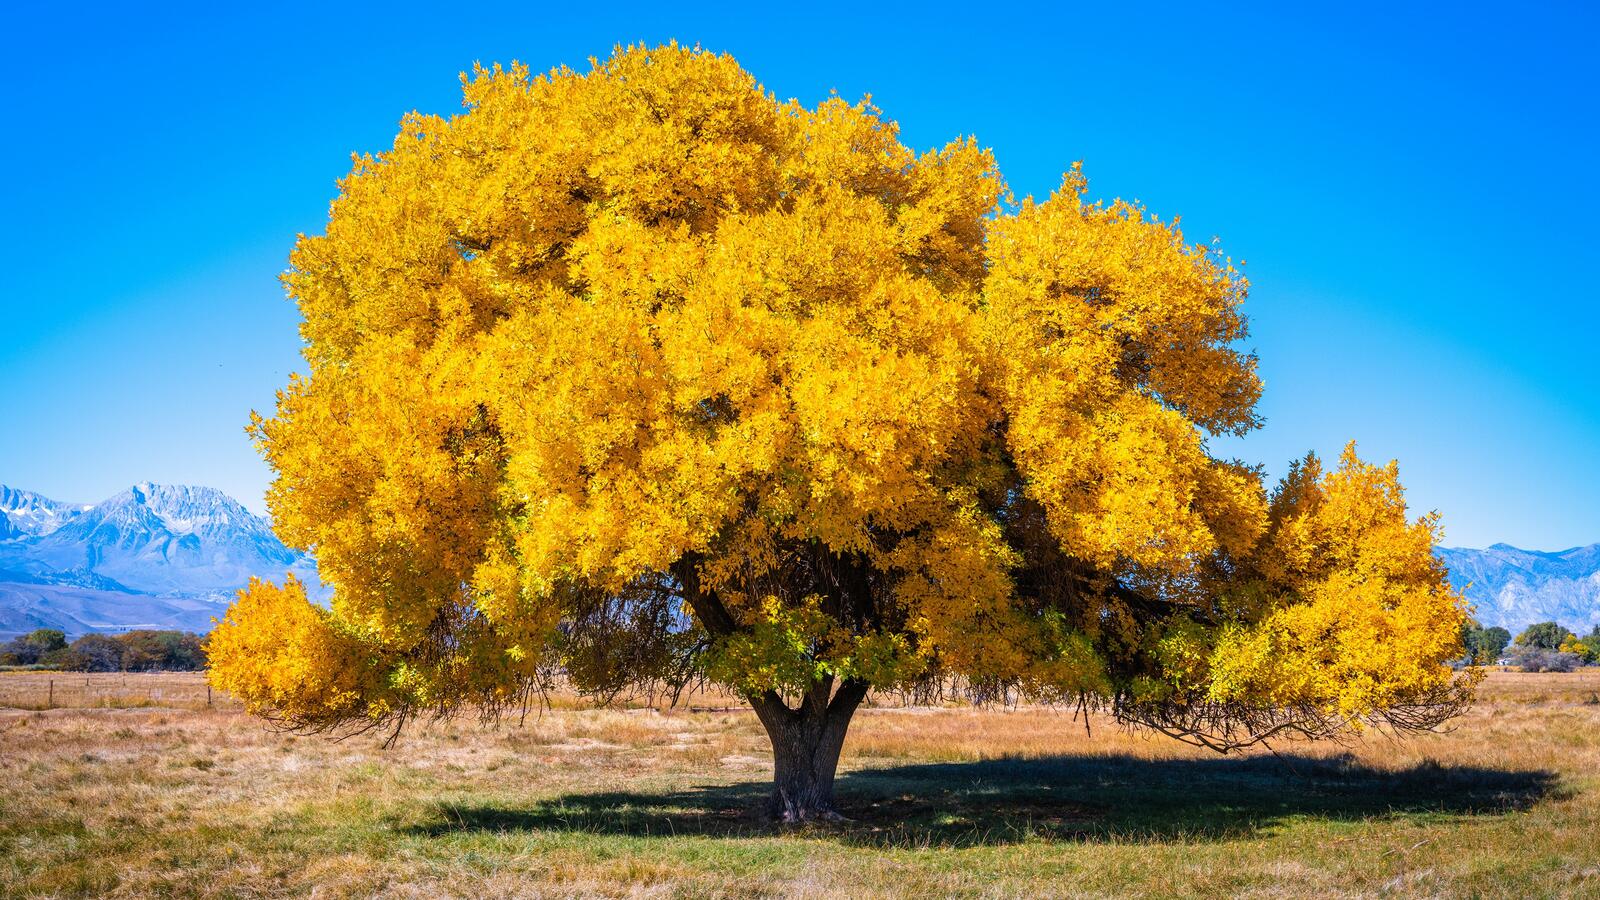 Free photo a tree with a large yellow crown